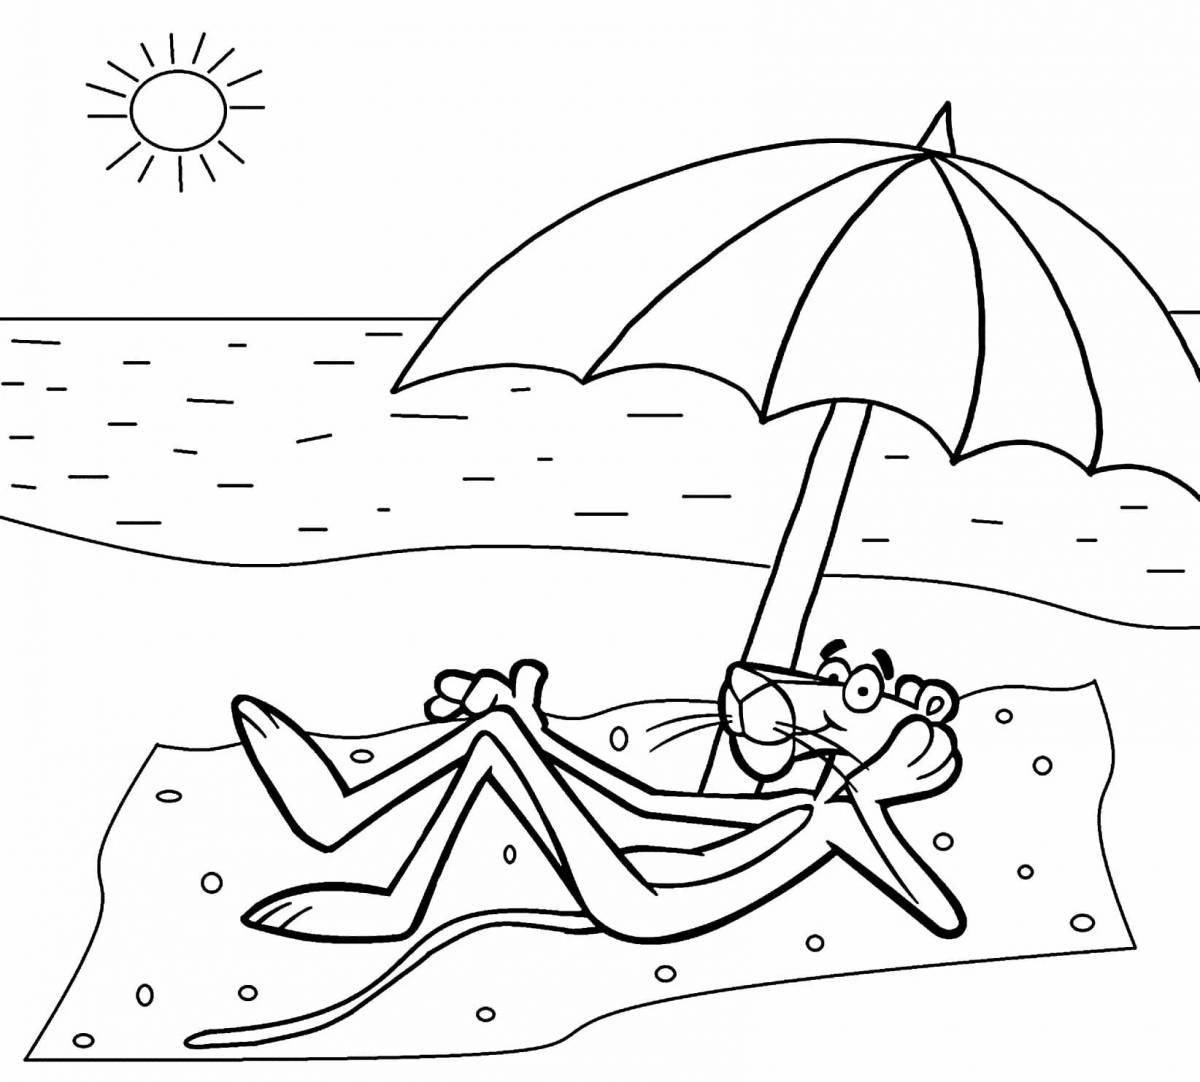 Scenic beach and sea coloring page